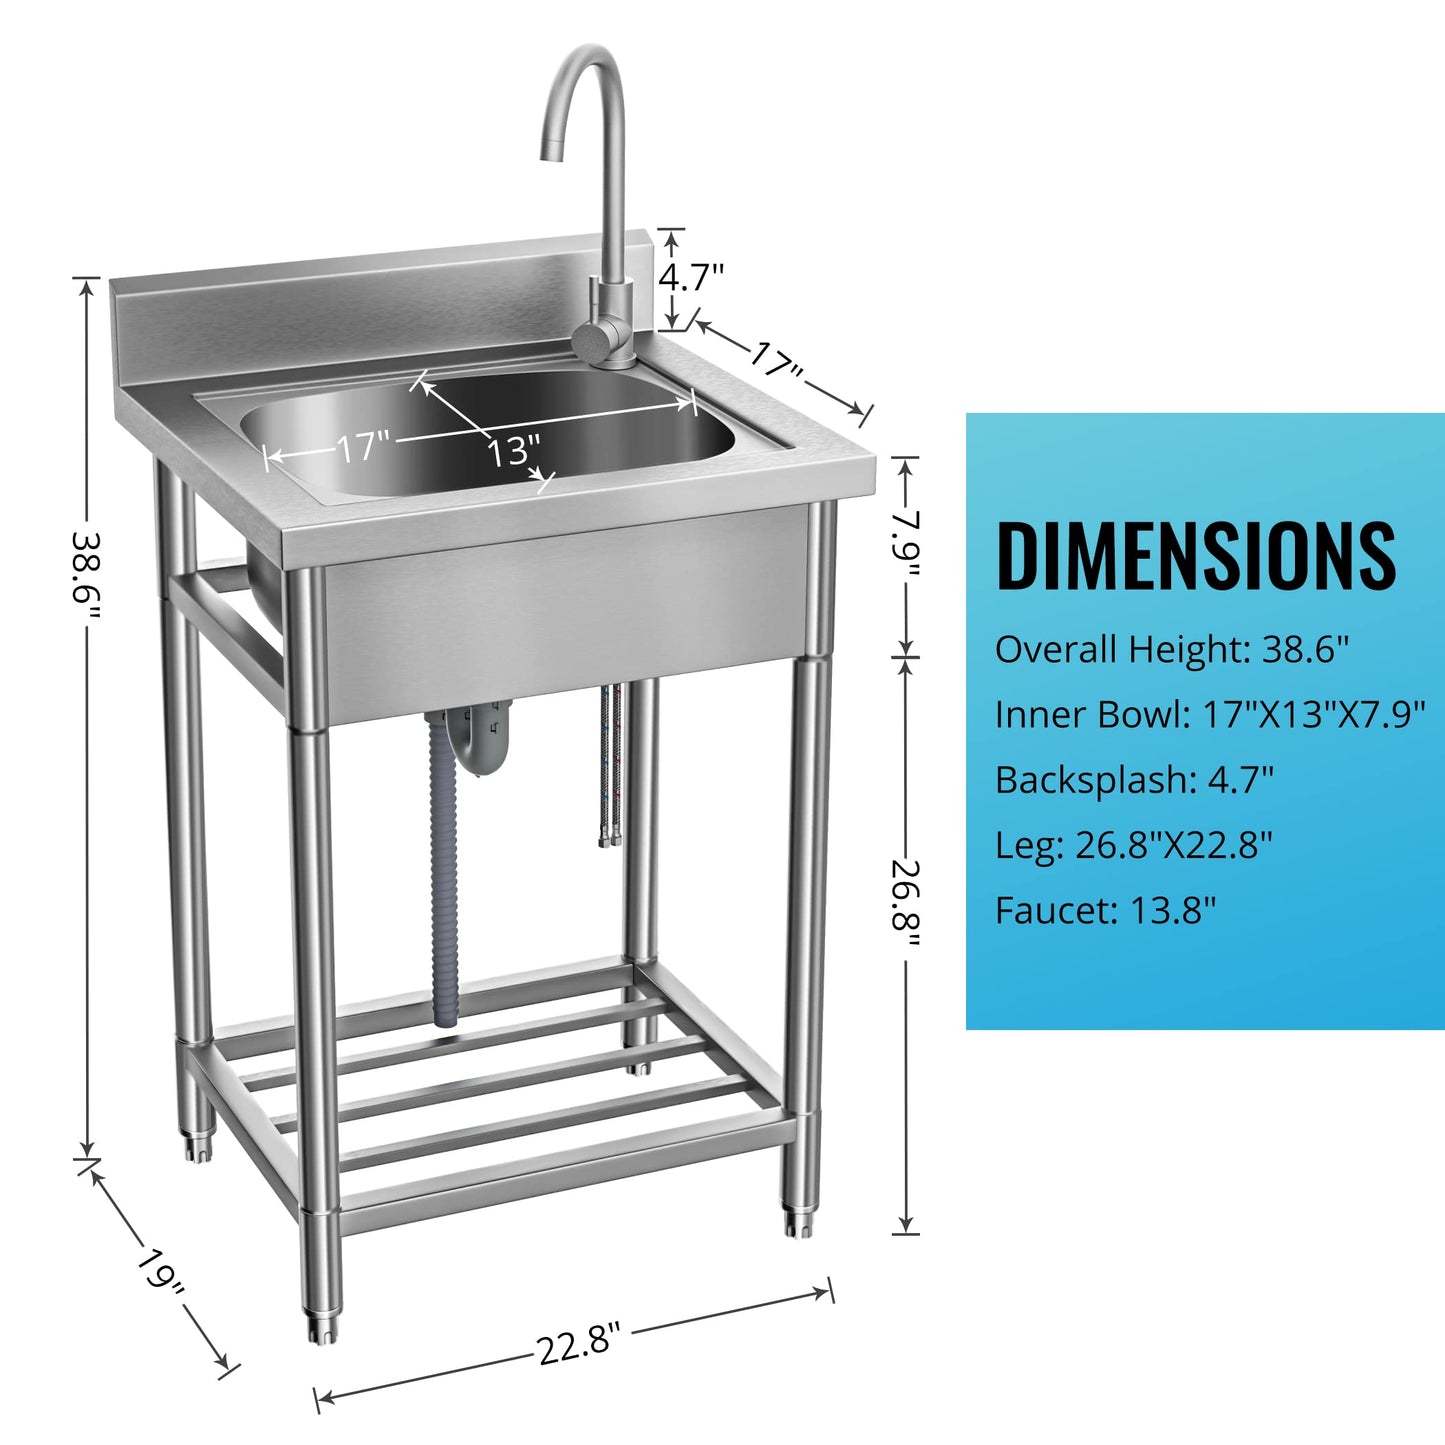 Utility Sink - Stainless Steel Free-Standing Single-Bowl Sink with Hot and Cold Water Pipes for Laundry, Bathroom, and Farmhouse